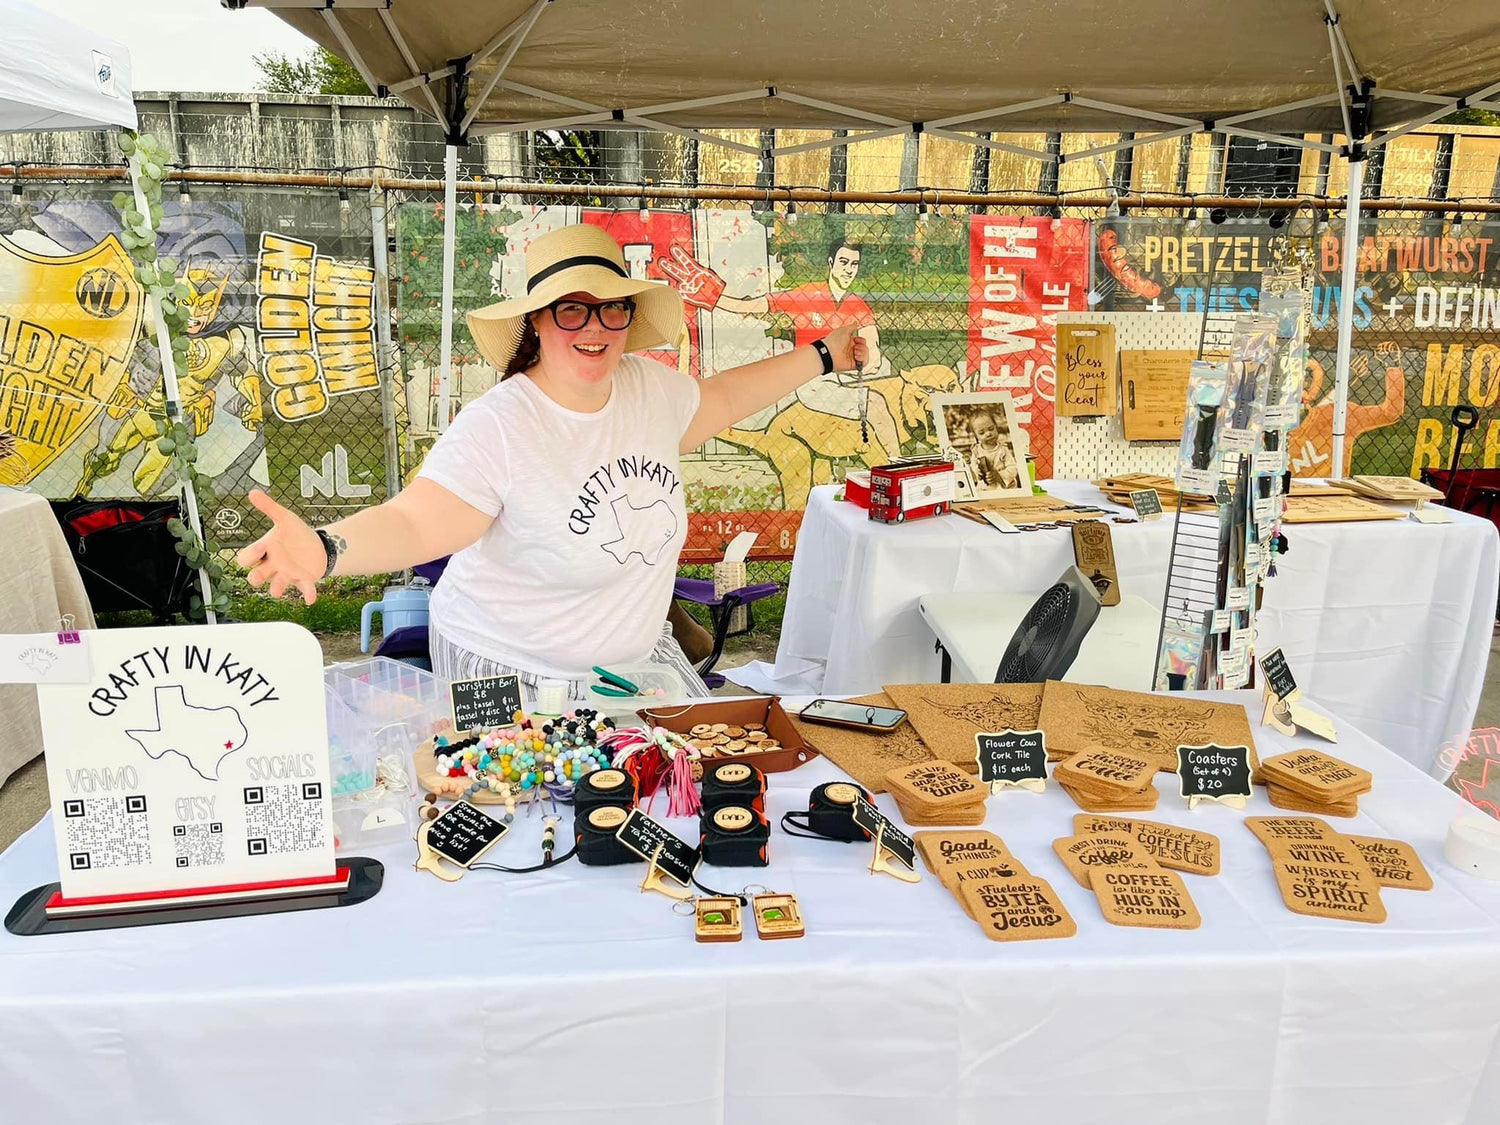 At KTX Market Day, thanks Dianna for the photo!